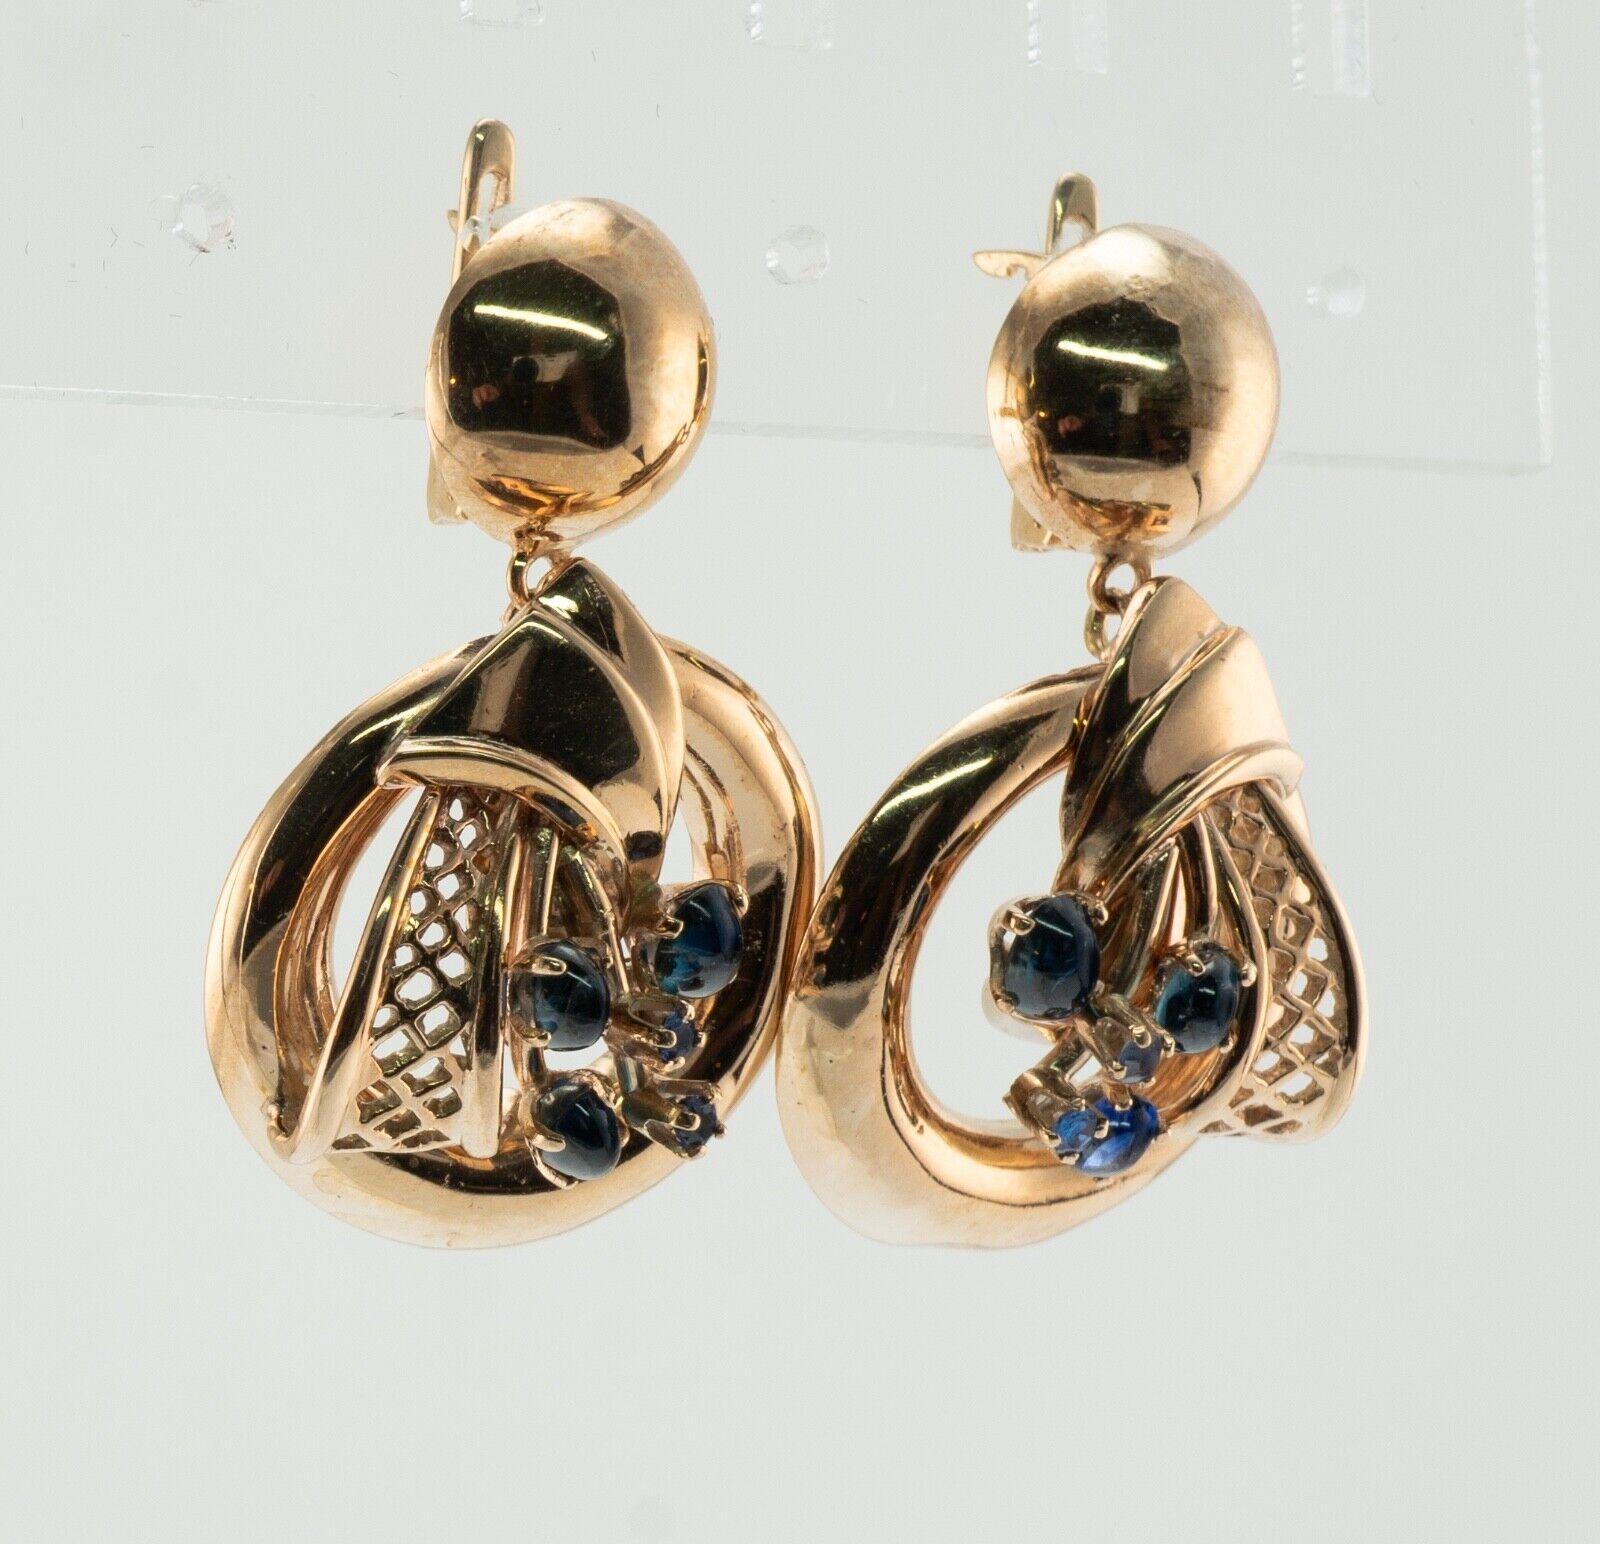 Natural Sapphire Earrings Drop Dangle 14K Gold Vintage

This vintage pair of earrings is crafted in solid 14K Yellow Gold (carefully tested and guaranteed). Each earring holds three natural sapphire cabochons and two round cut sapphires. These gems